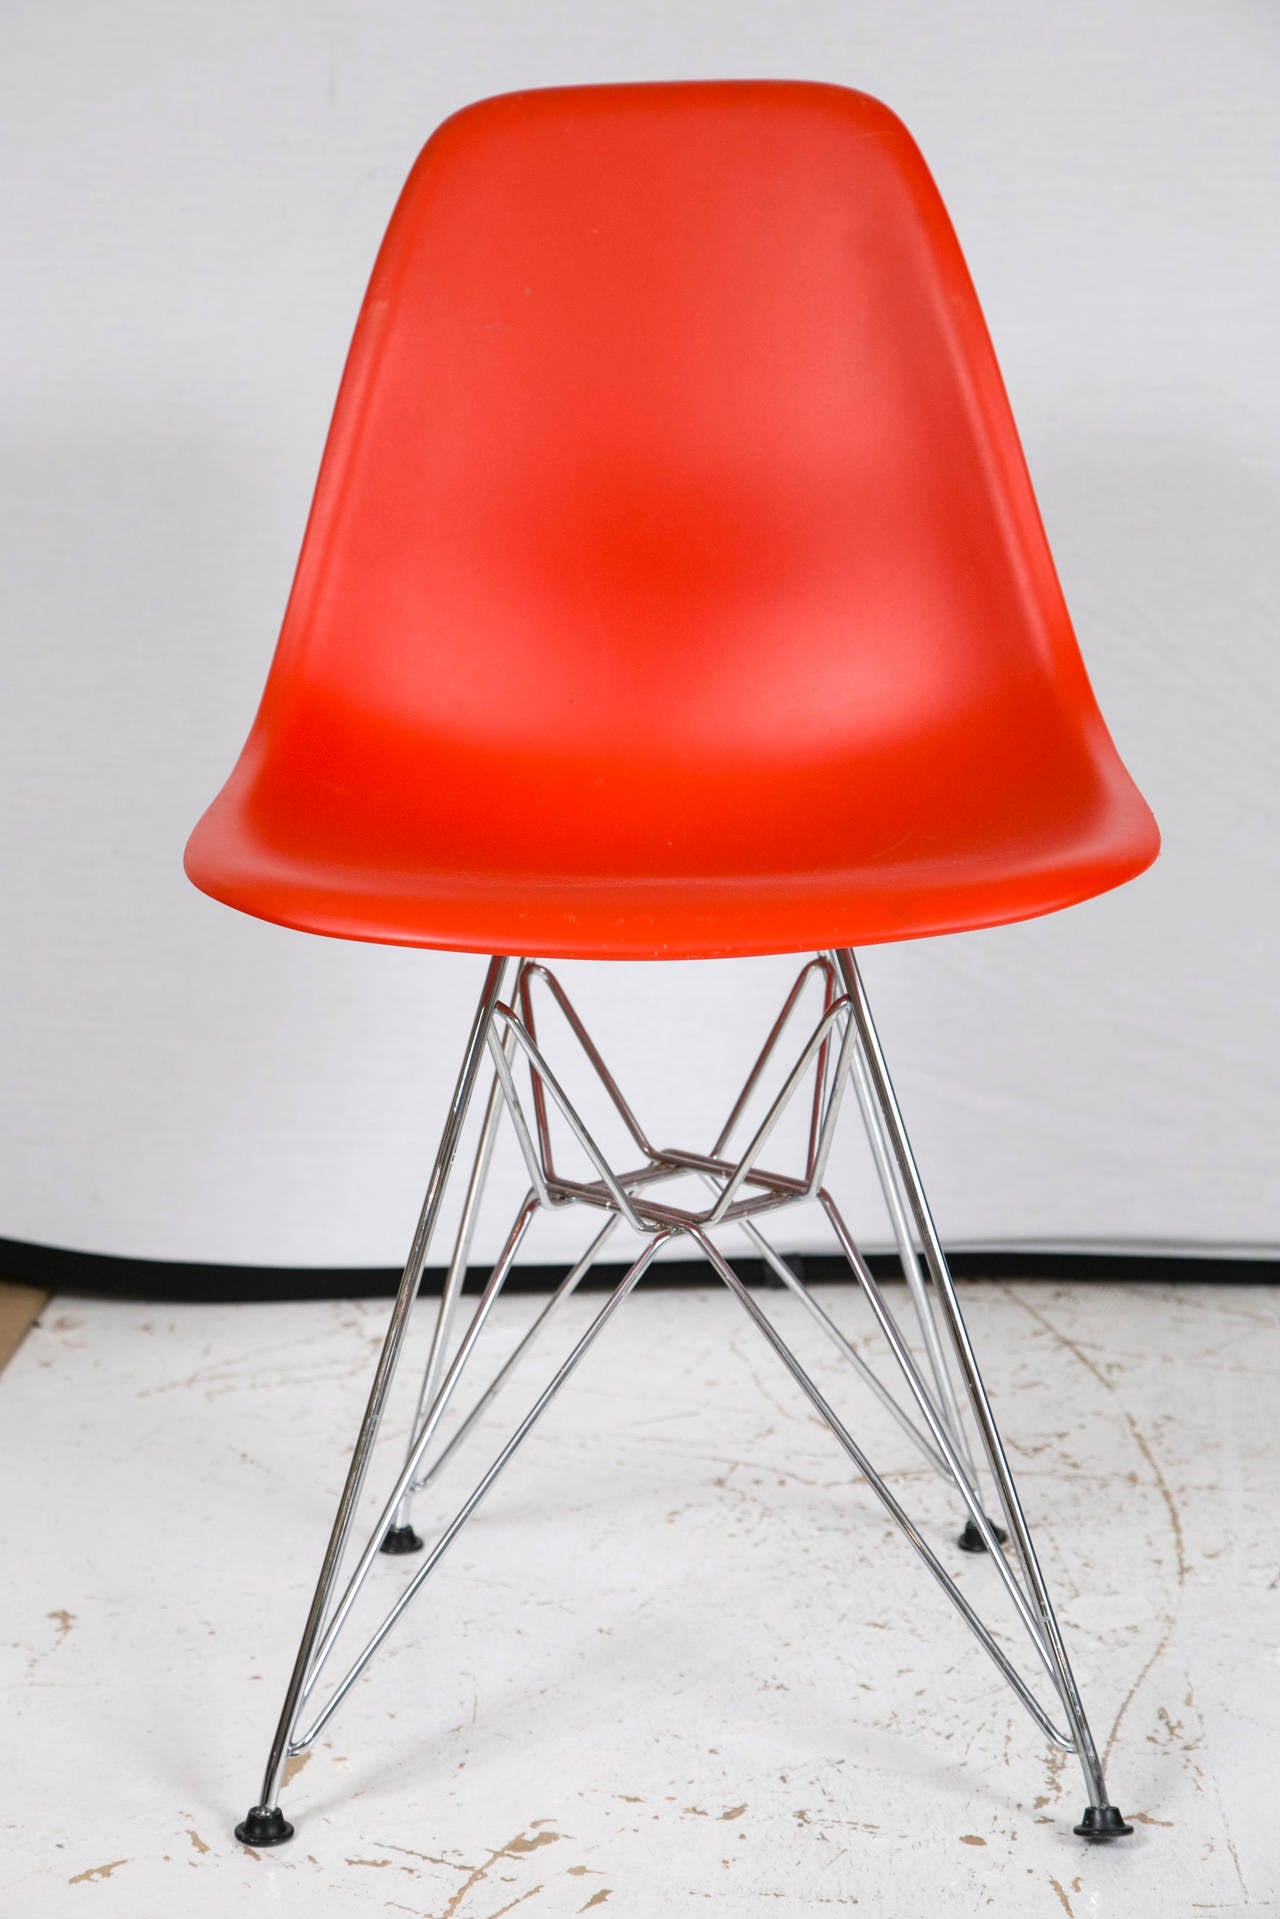 A true classic piece by the Eames team for Herman Miller. In excellent condition, perfect for a pop of color in a large space or the smallest nook. Has labels of authenticity, refer to pictures. Timeless